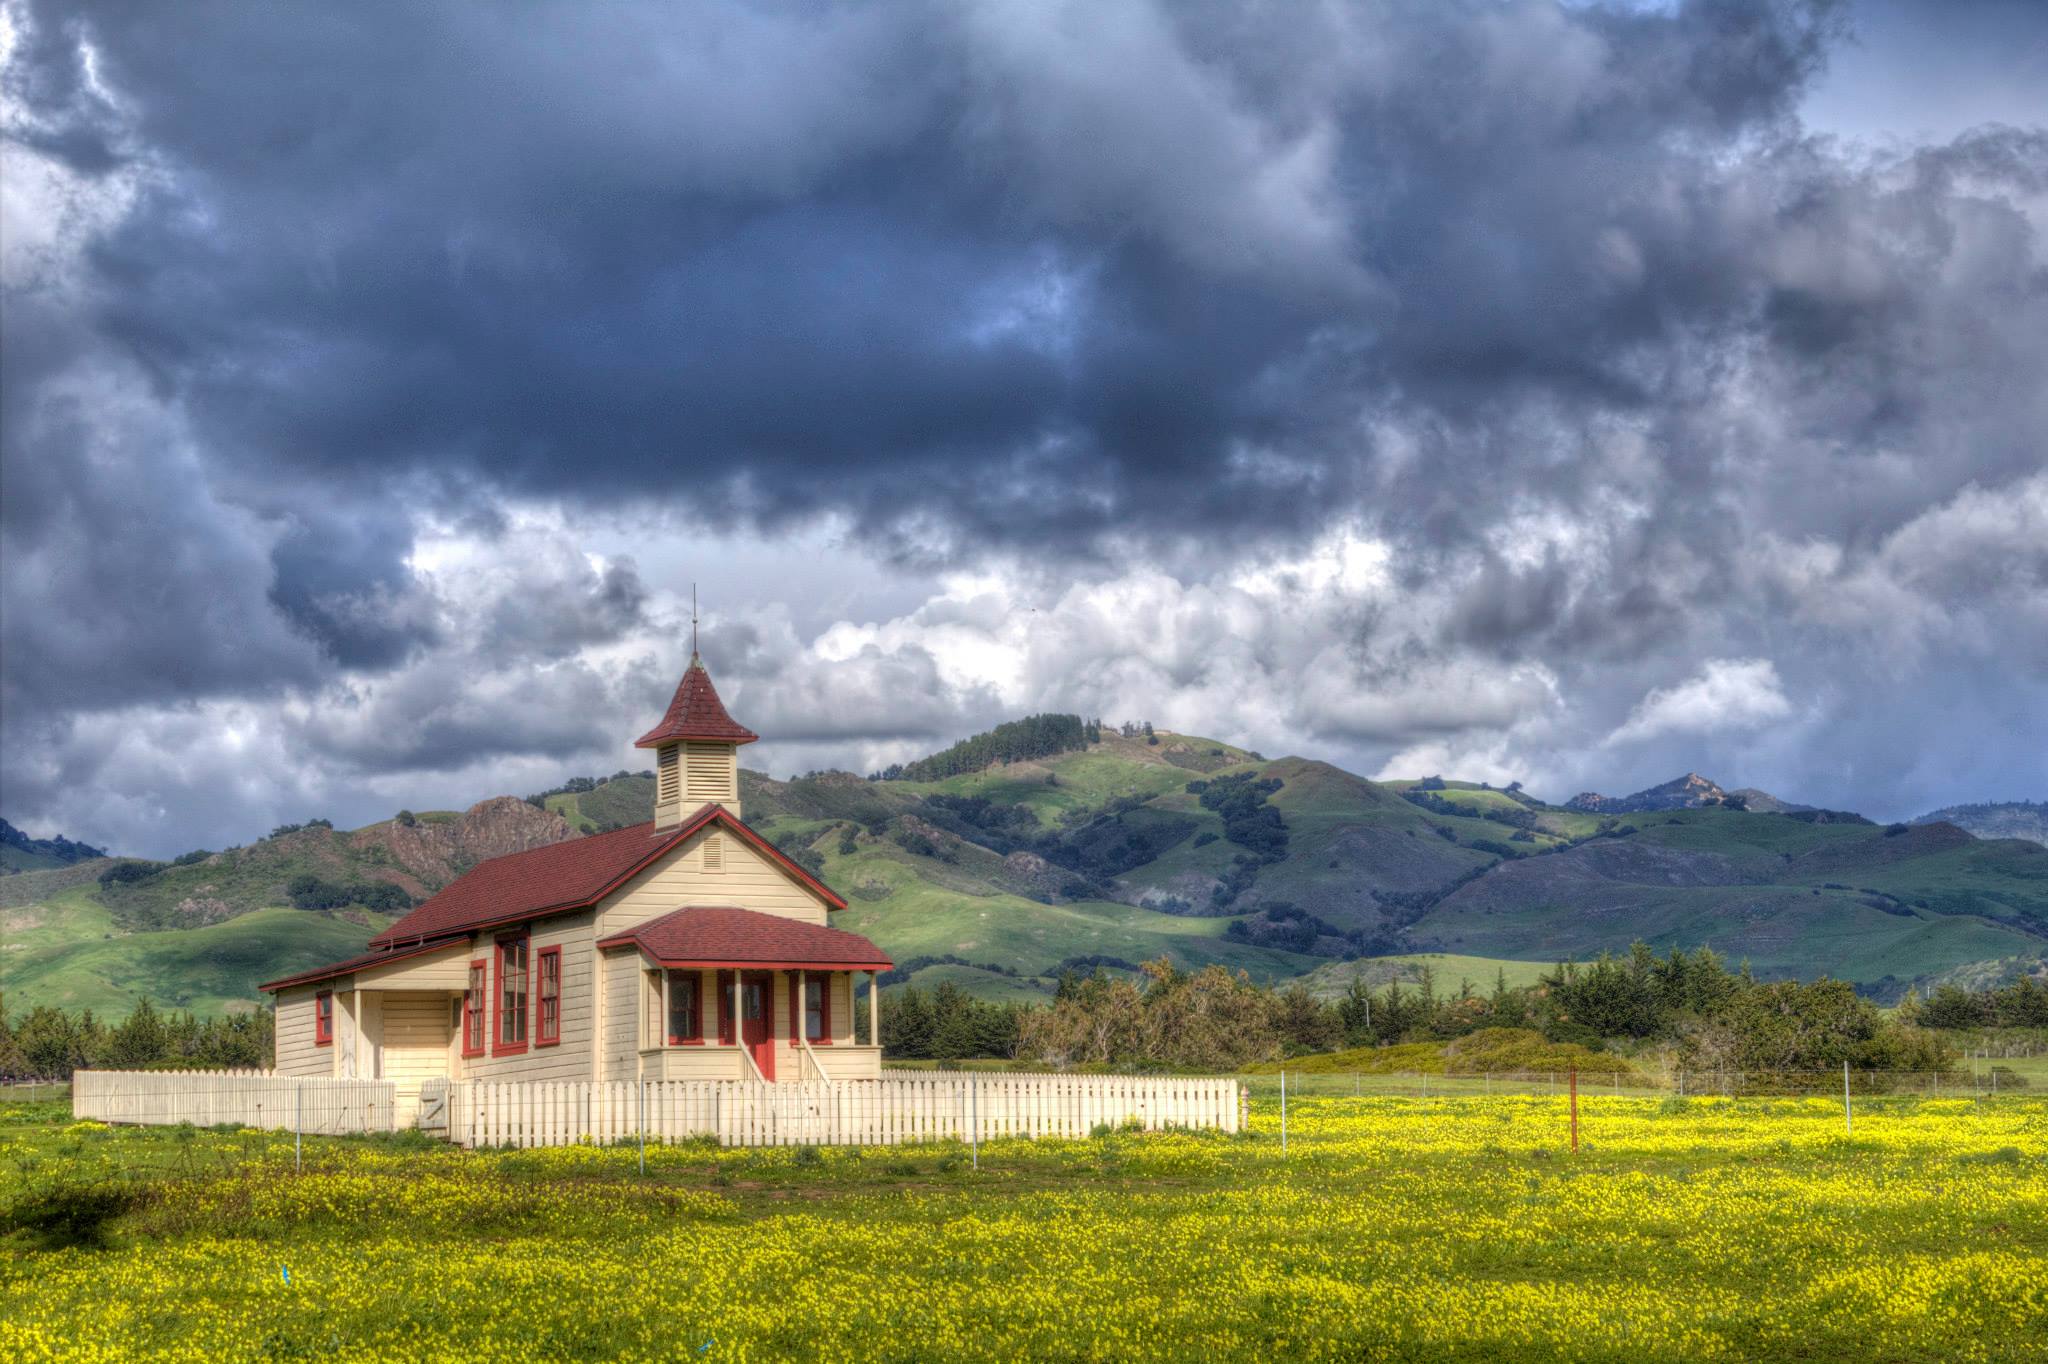 Cloudy day in San Simeon, an old schoolhouse surrounded by a picket fence in an open field